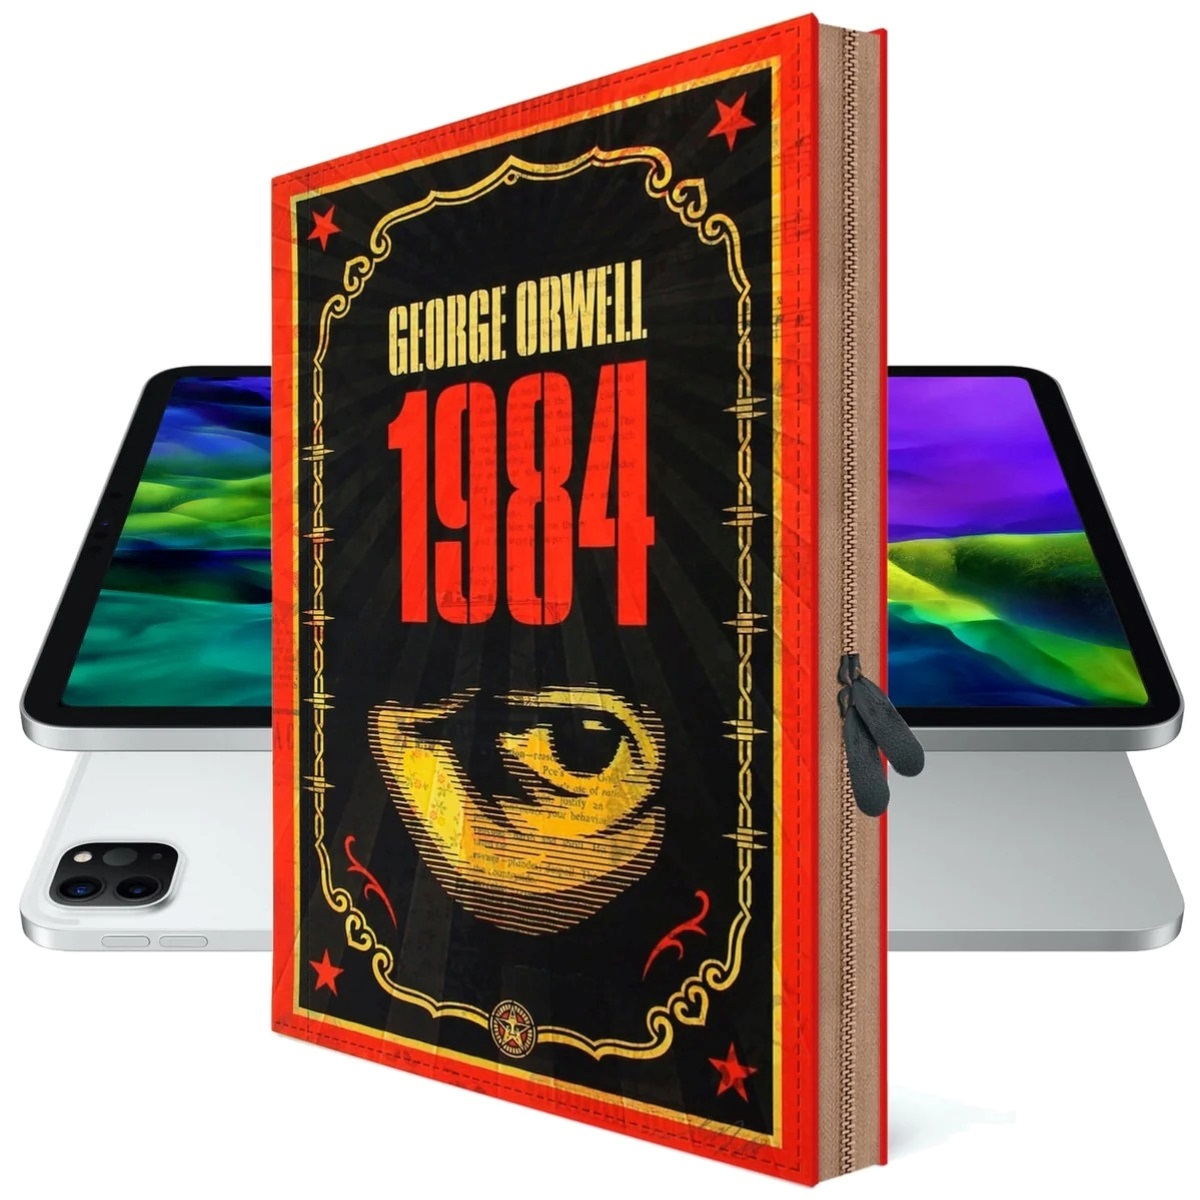 8-unbelievable-1984-by-george-orwell-on-kindle-for-2023